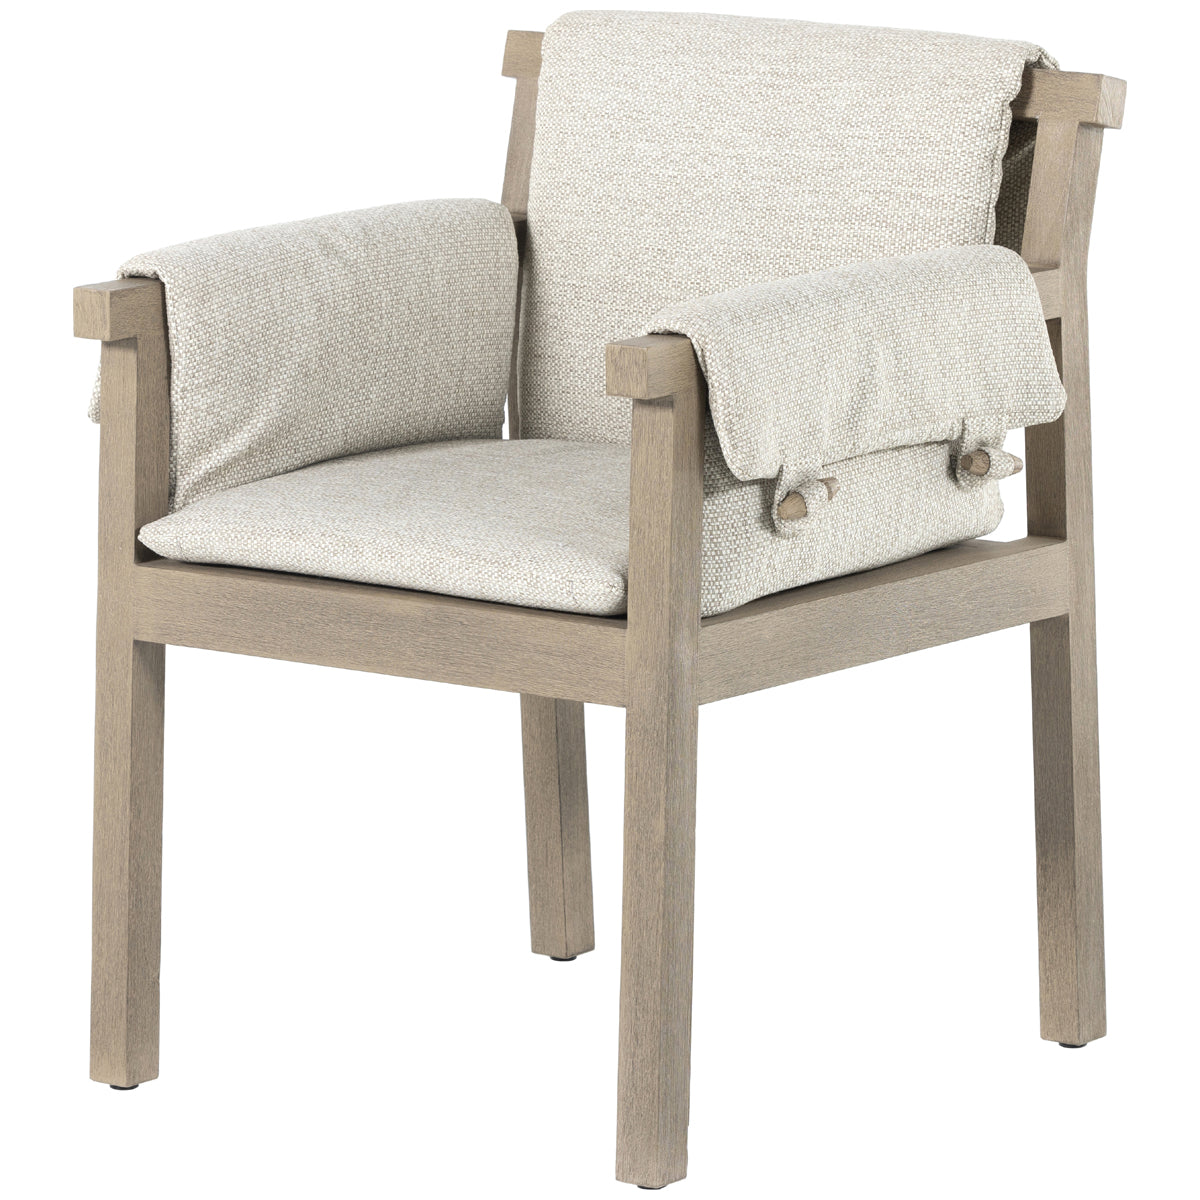 Four Hands Solano Galway Outdoor Dining Chair